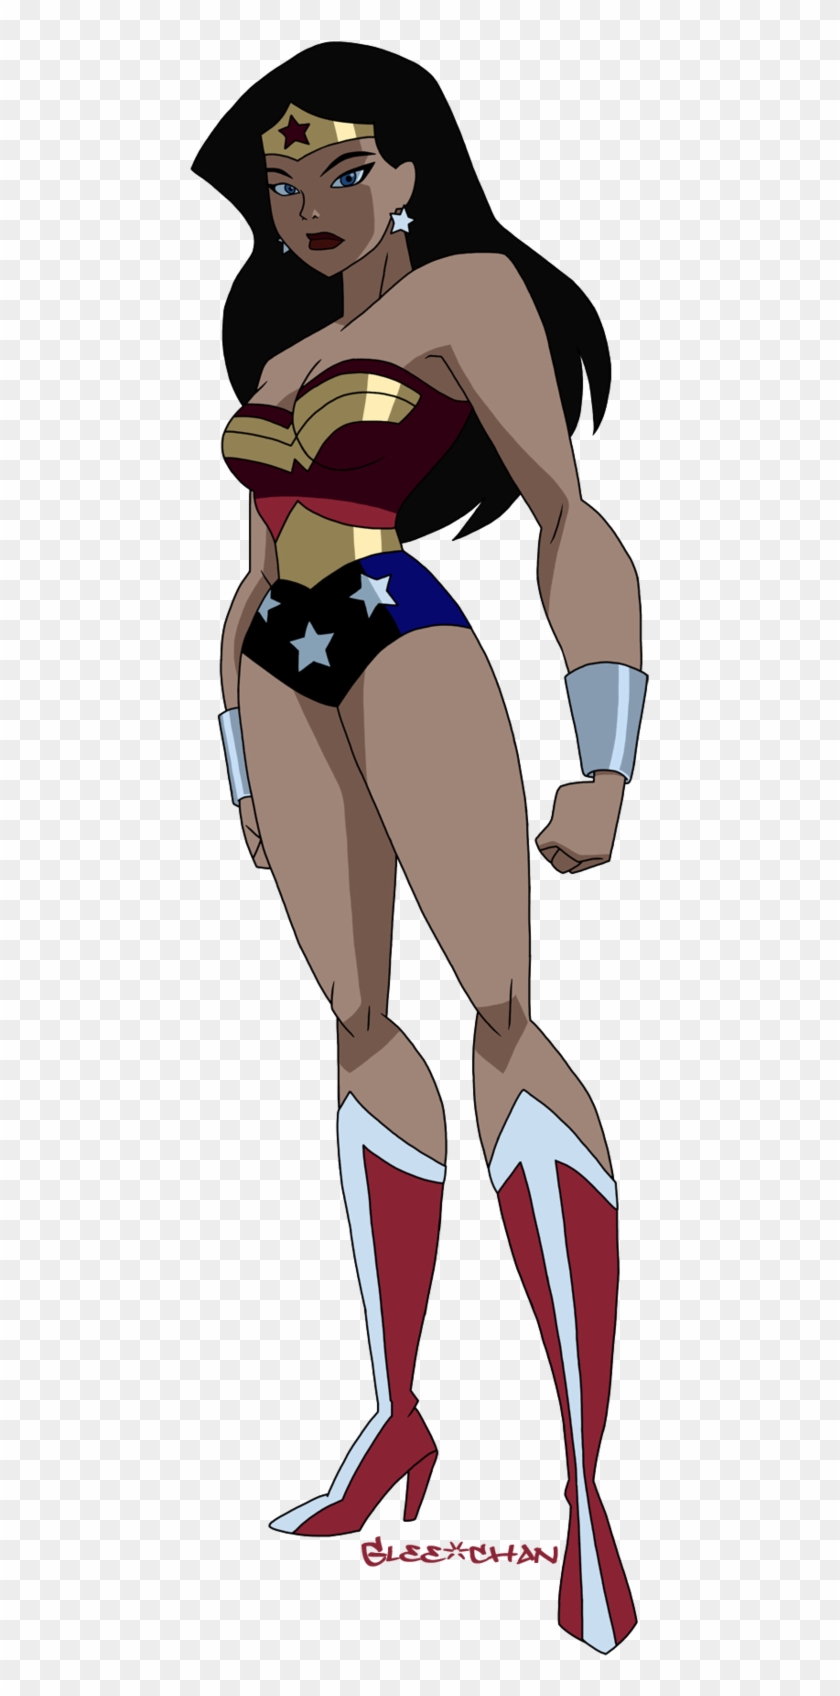 Wonder Woman By Glee-chan - Wonder Woman Justice League Unlimited #1270274